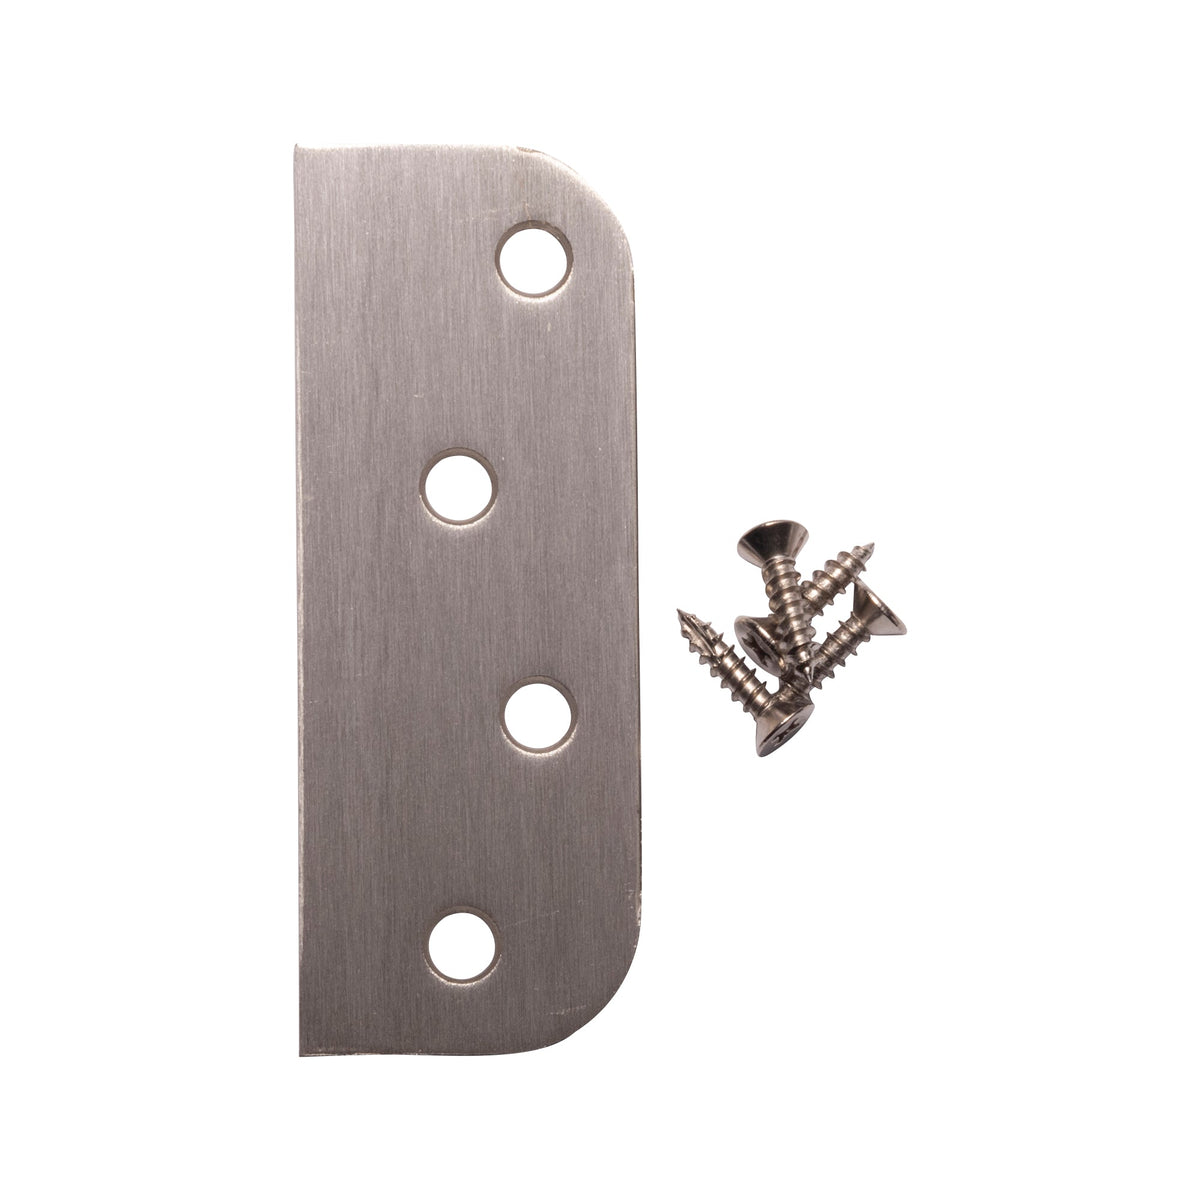 Hinge Blanks - Filler Plates with Screws - 4 Inches - Multiple Finishes Available - 3 Pack